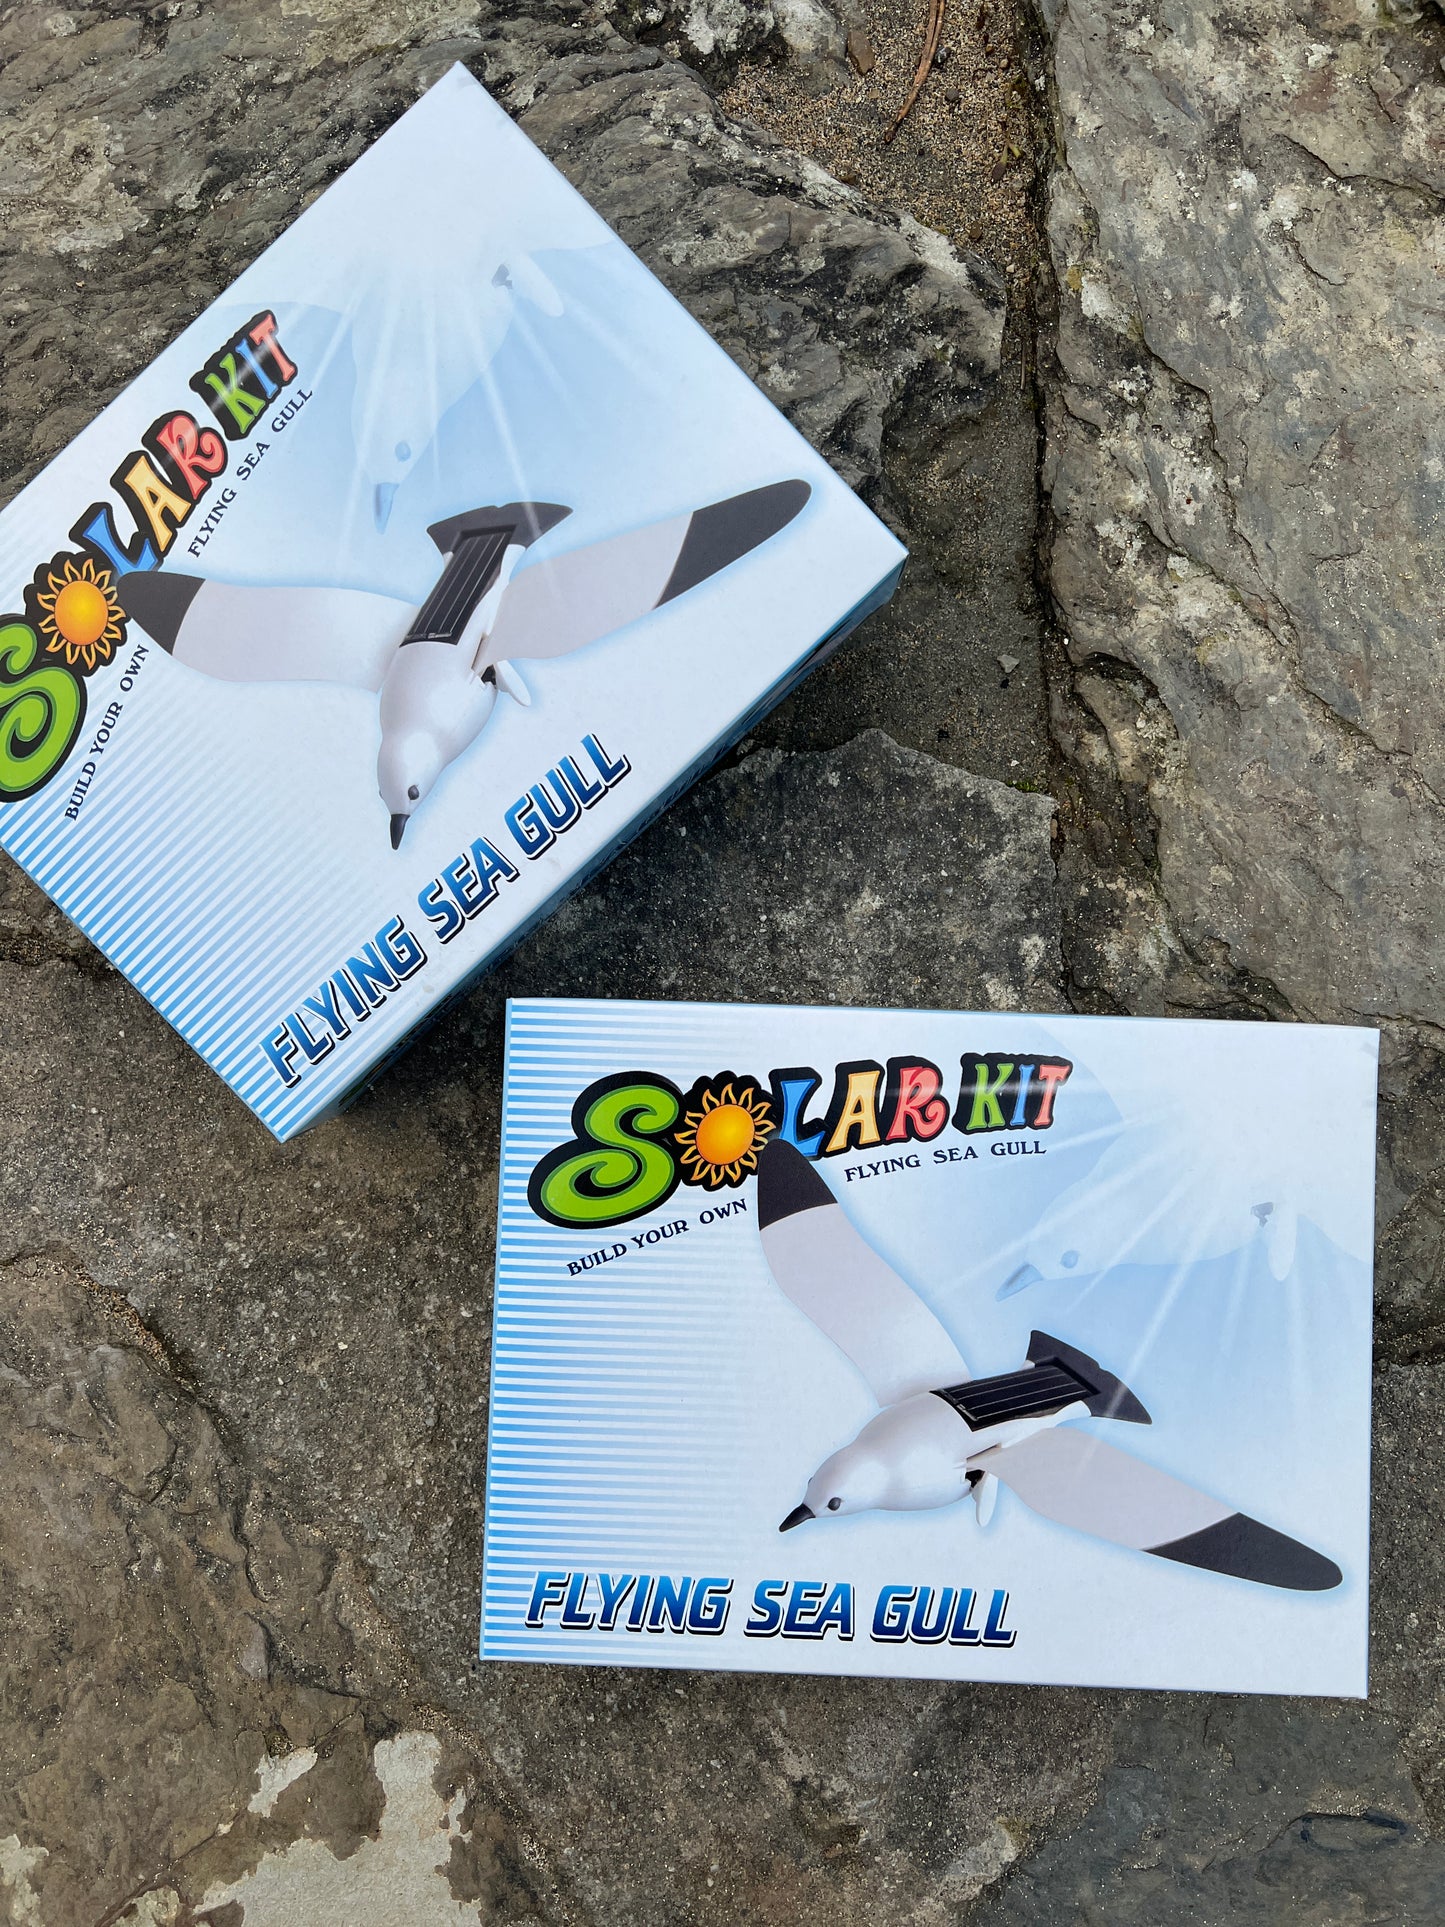 build your own solar powered flying seagull kit 